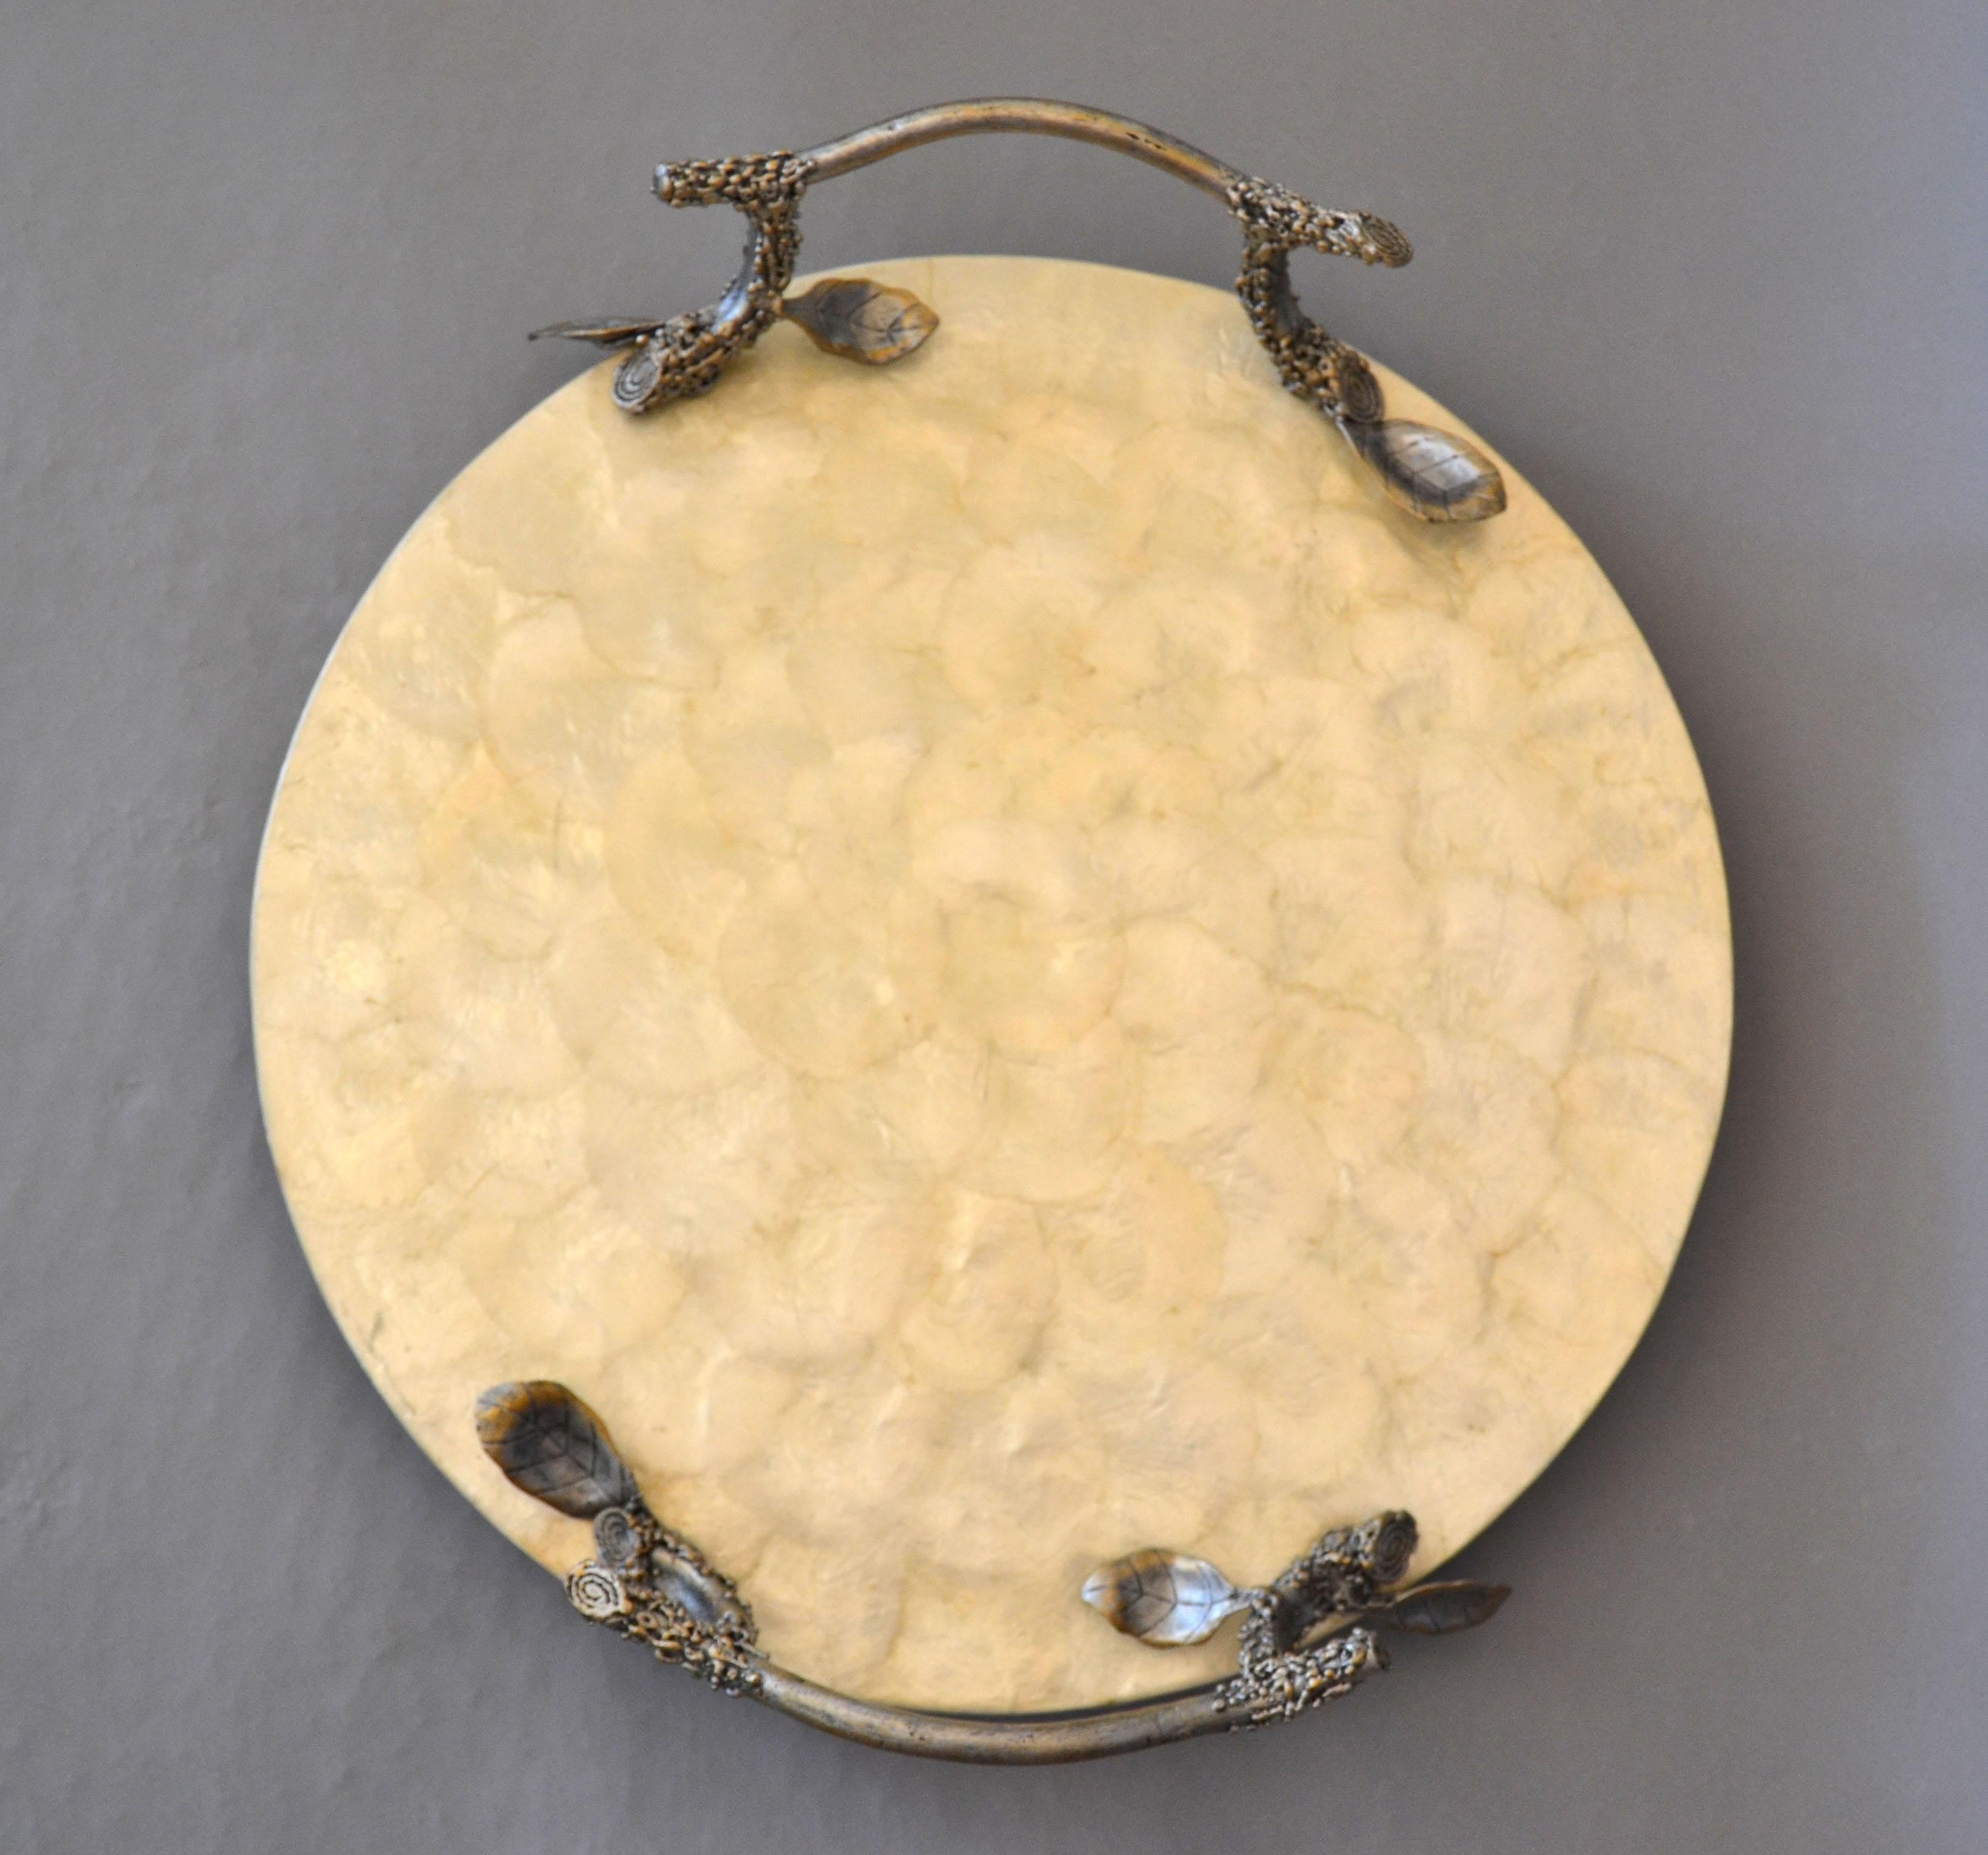 Charming round serving or decorative tray made out of capiz shells over pewter.
The handles are crafted as whimsical tree branches and it rests on 4 ball feet.
This tray is incredibly versatile, perfect for a serving platter, centerpiece or fruit